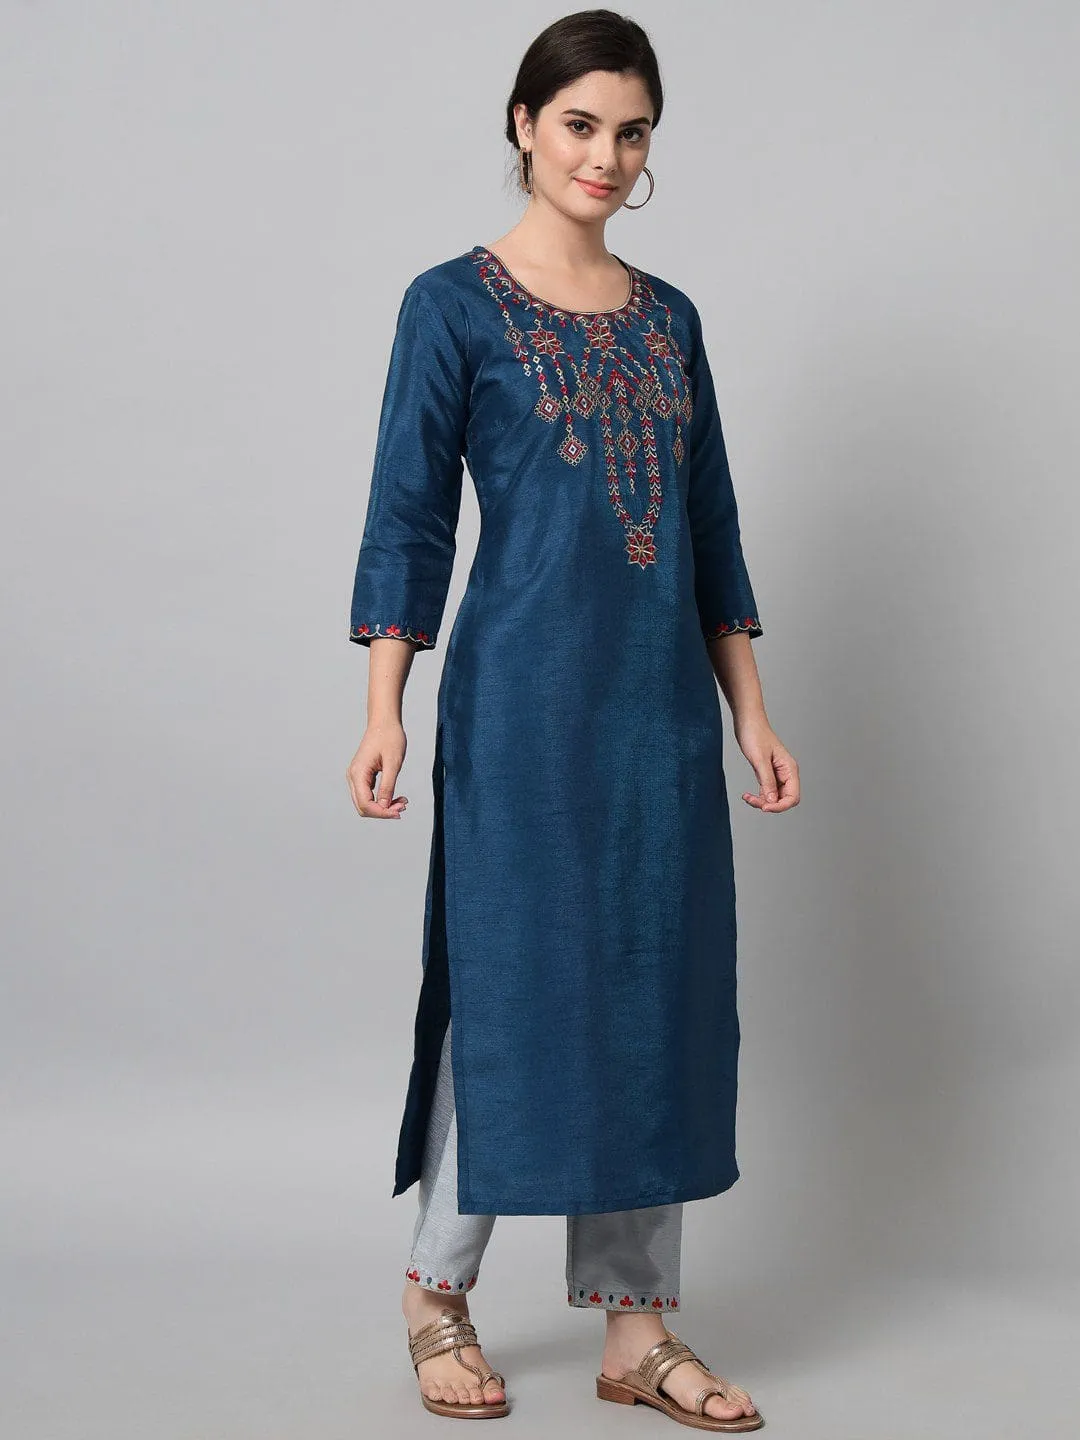 Alluring navy blue color viscose rayon fabric with embroidered pattern kurta pant set for women